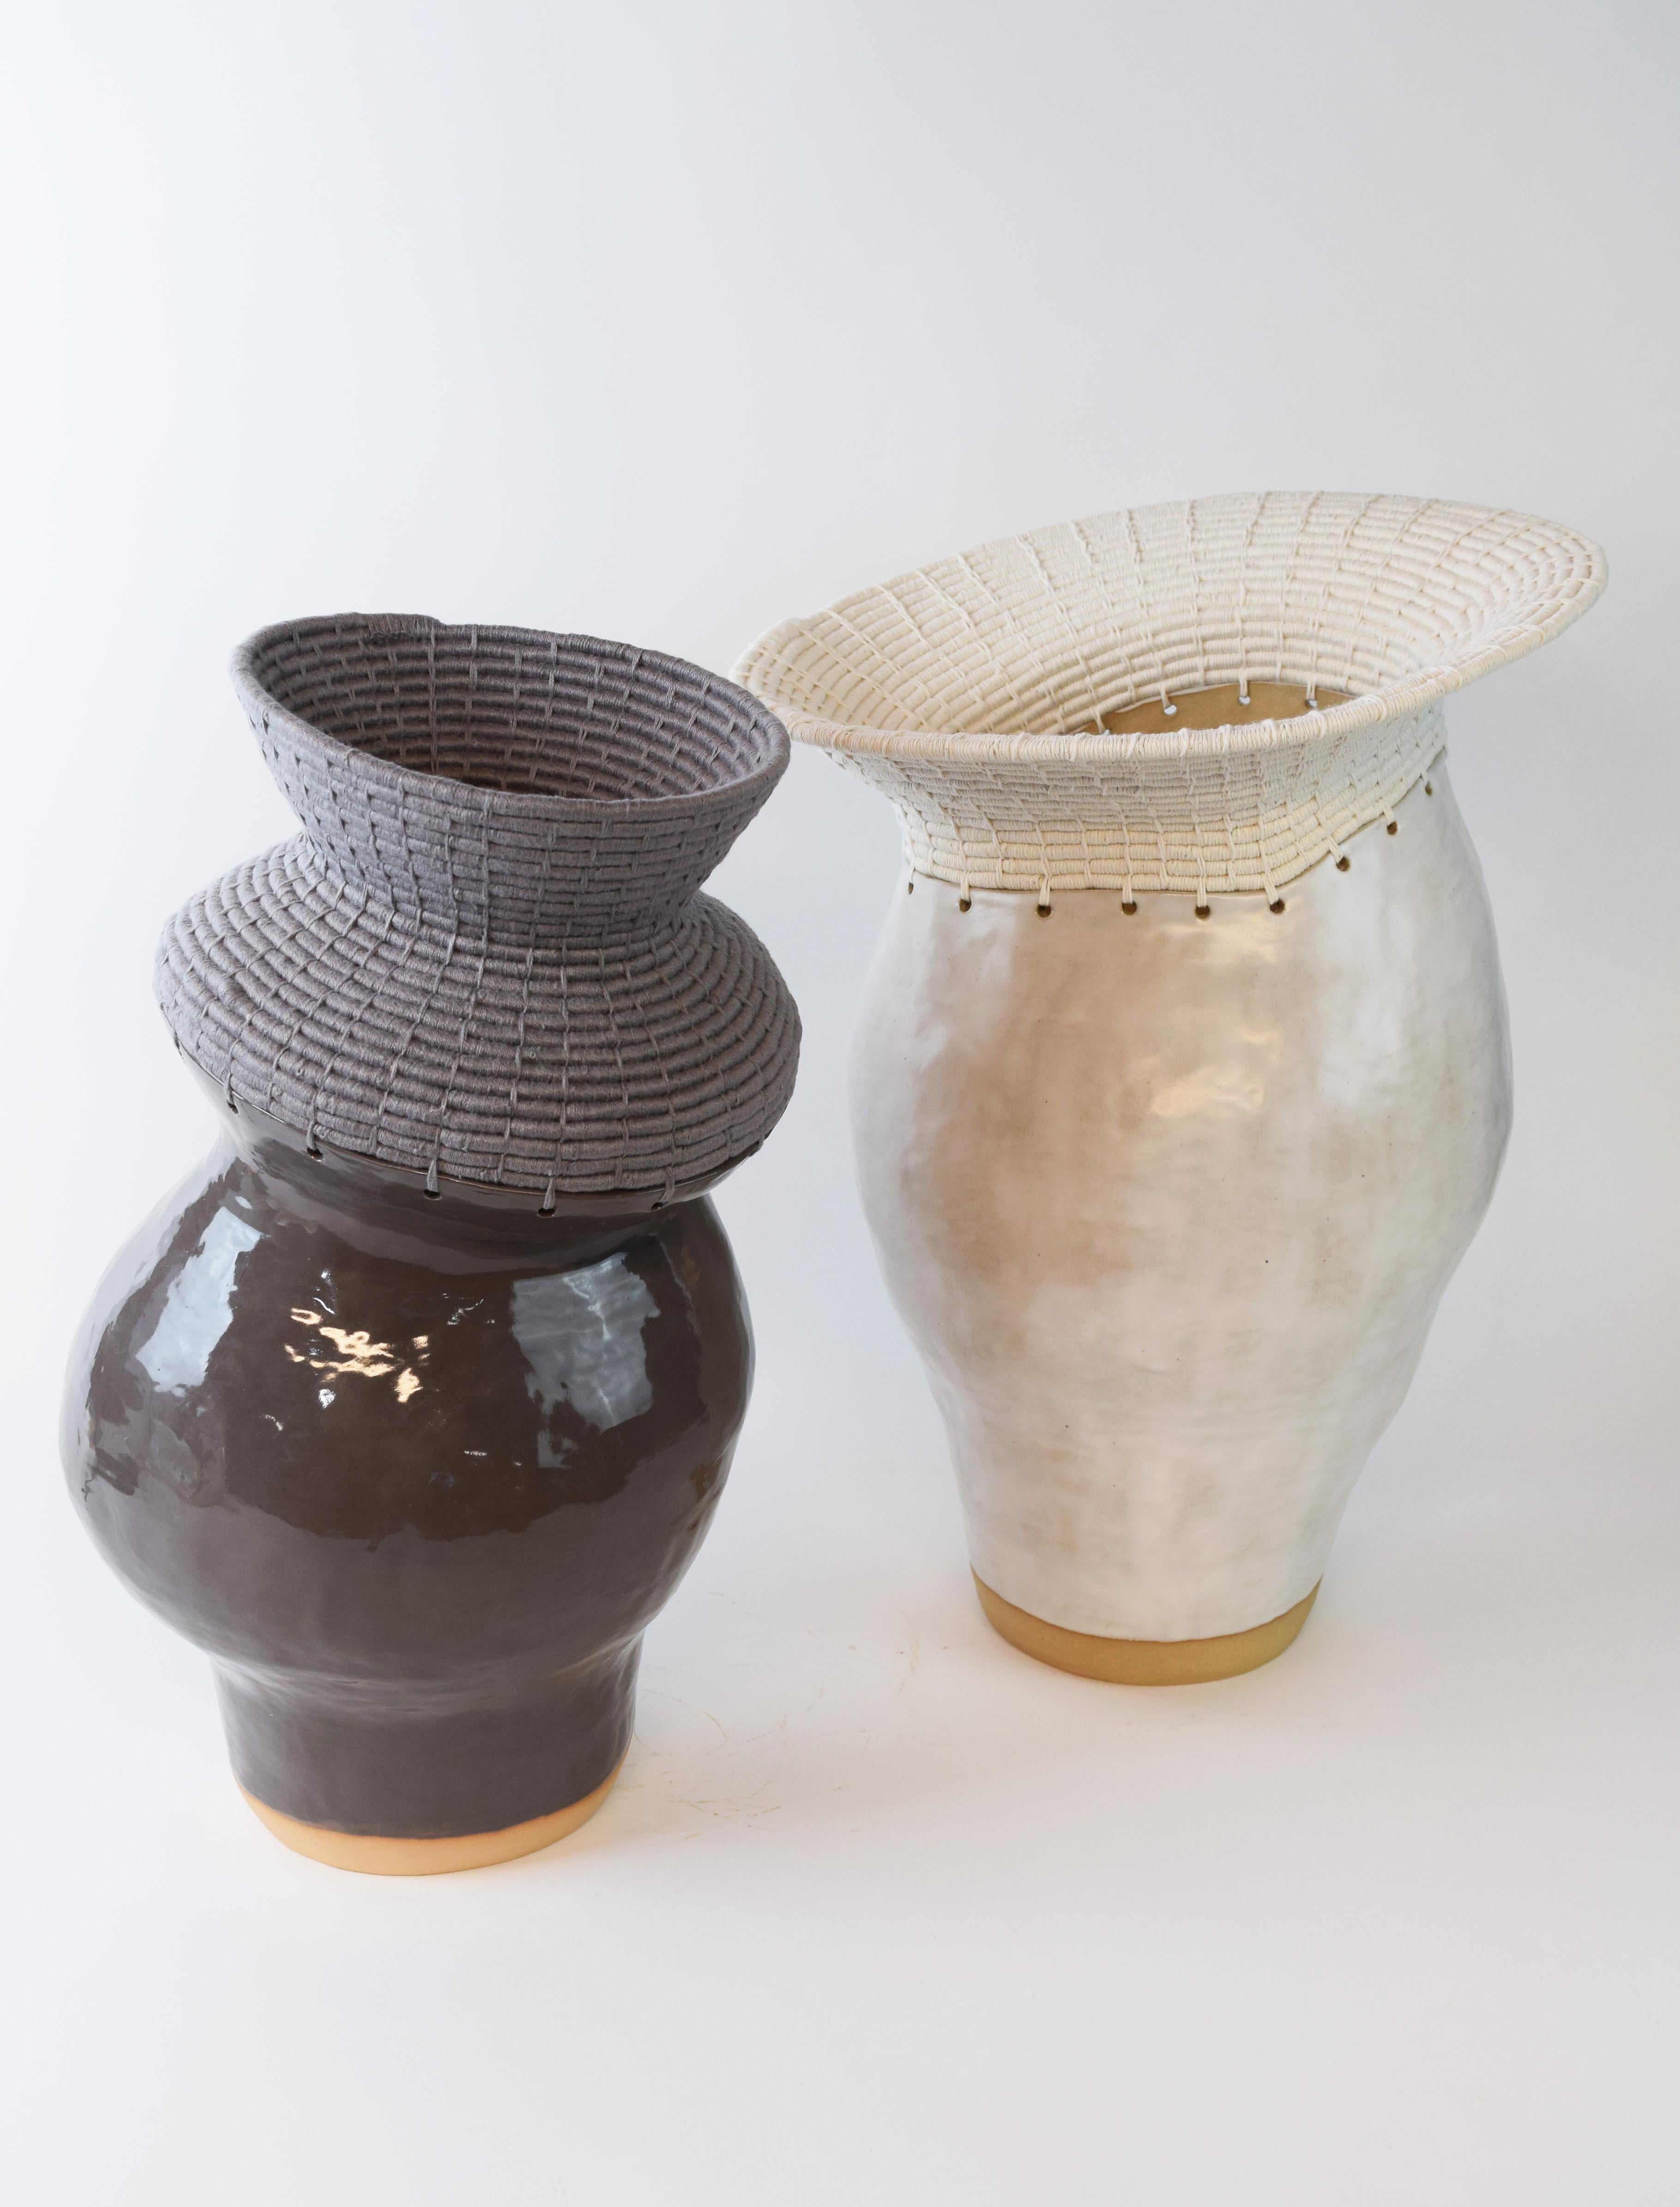 Hand-Crafted One of a Kind Asymmetrical Ceramic Vessel #772, Charcoal Glaze Woven Gray Cotton For Sale